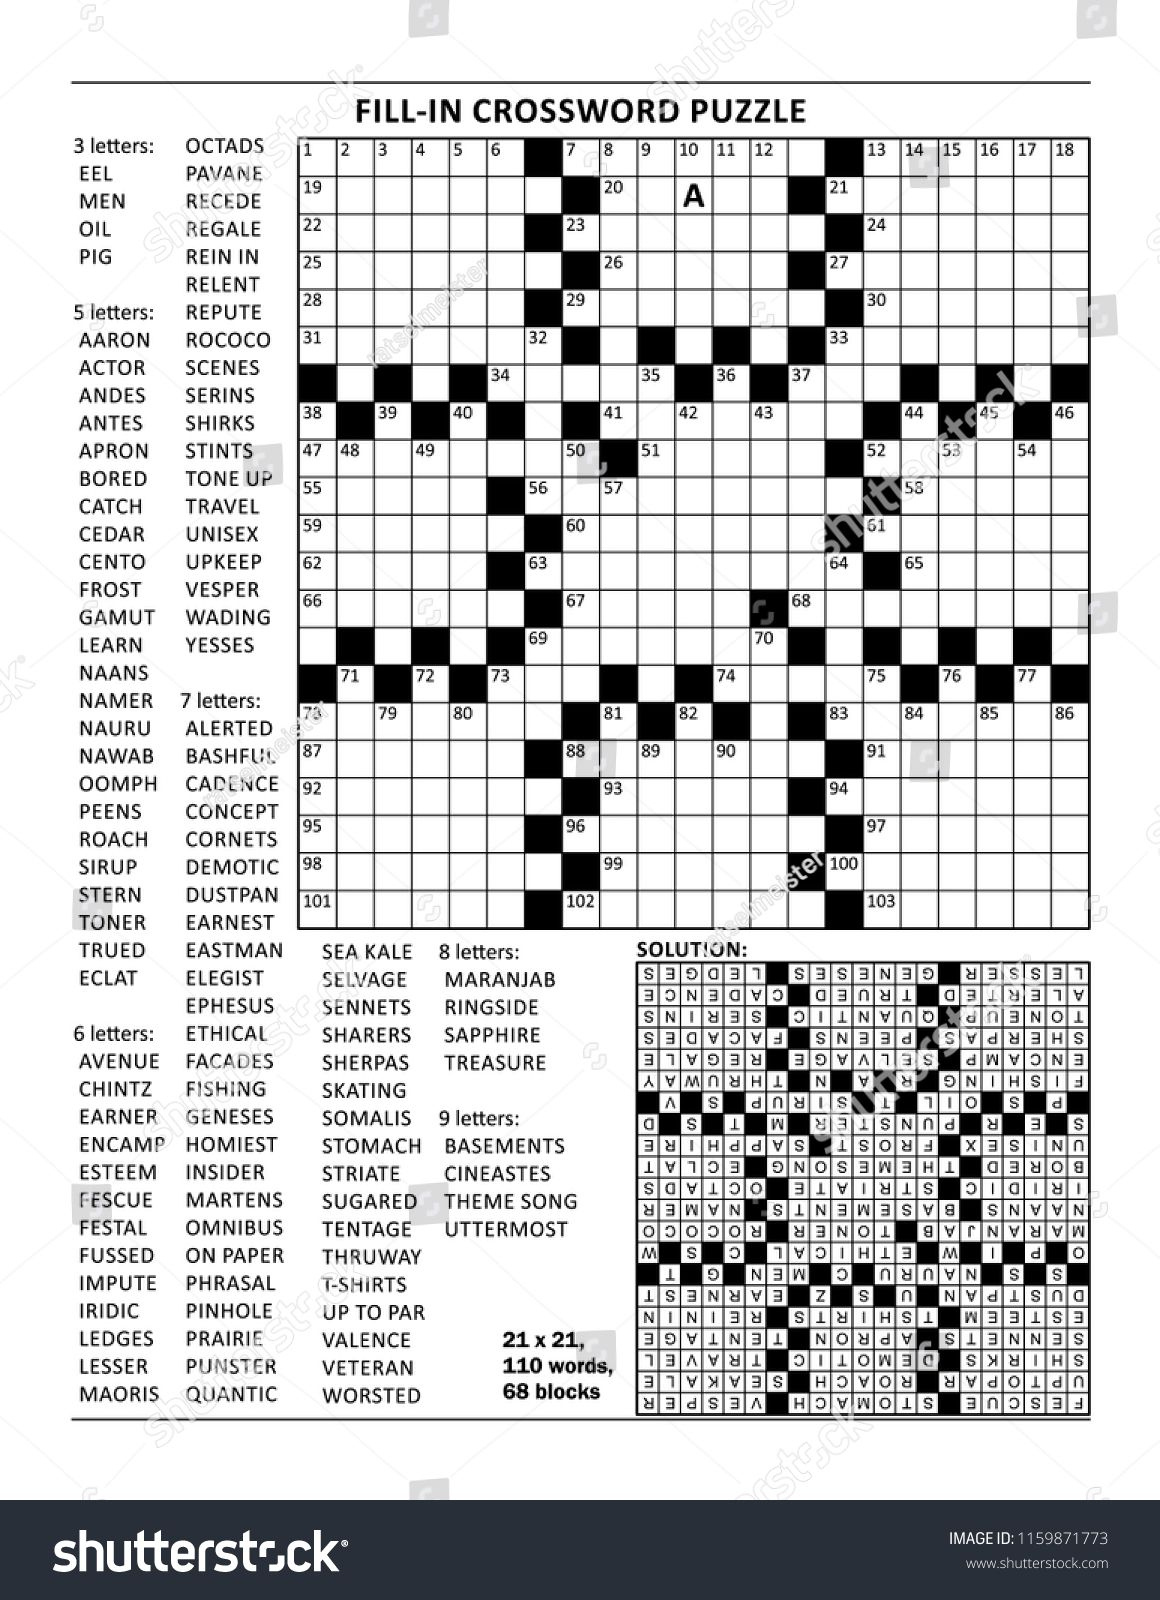 Criss Cross Word Puzzle Fill In The Blanks Of The Crossword Puzzle 